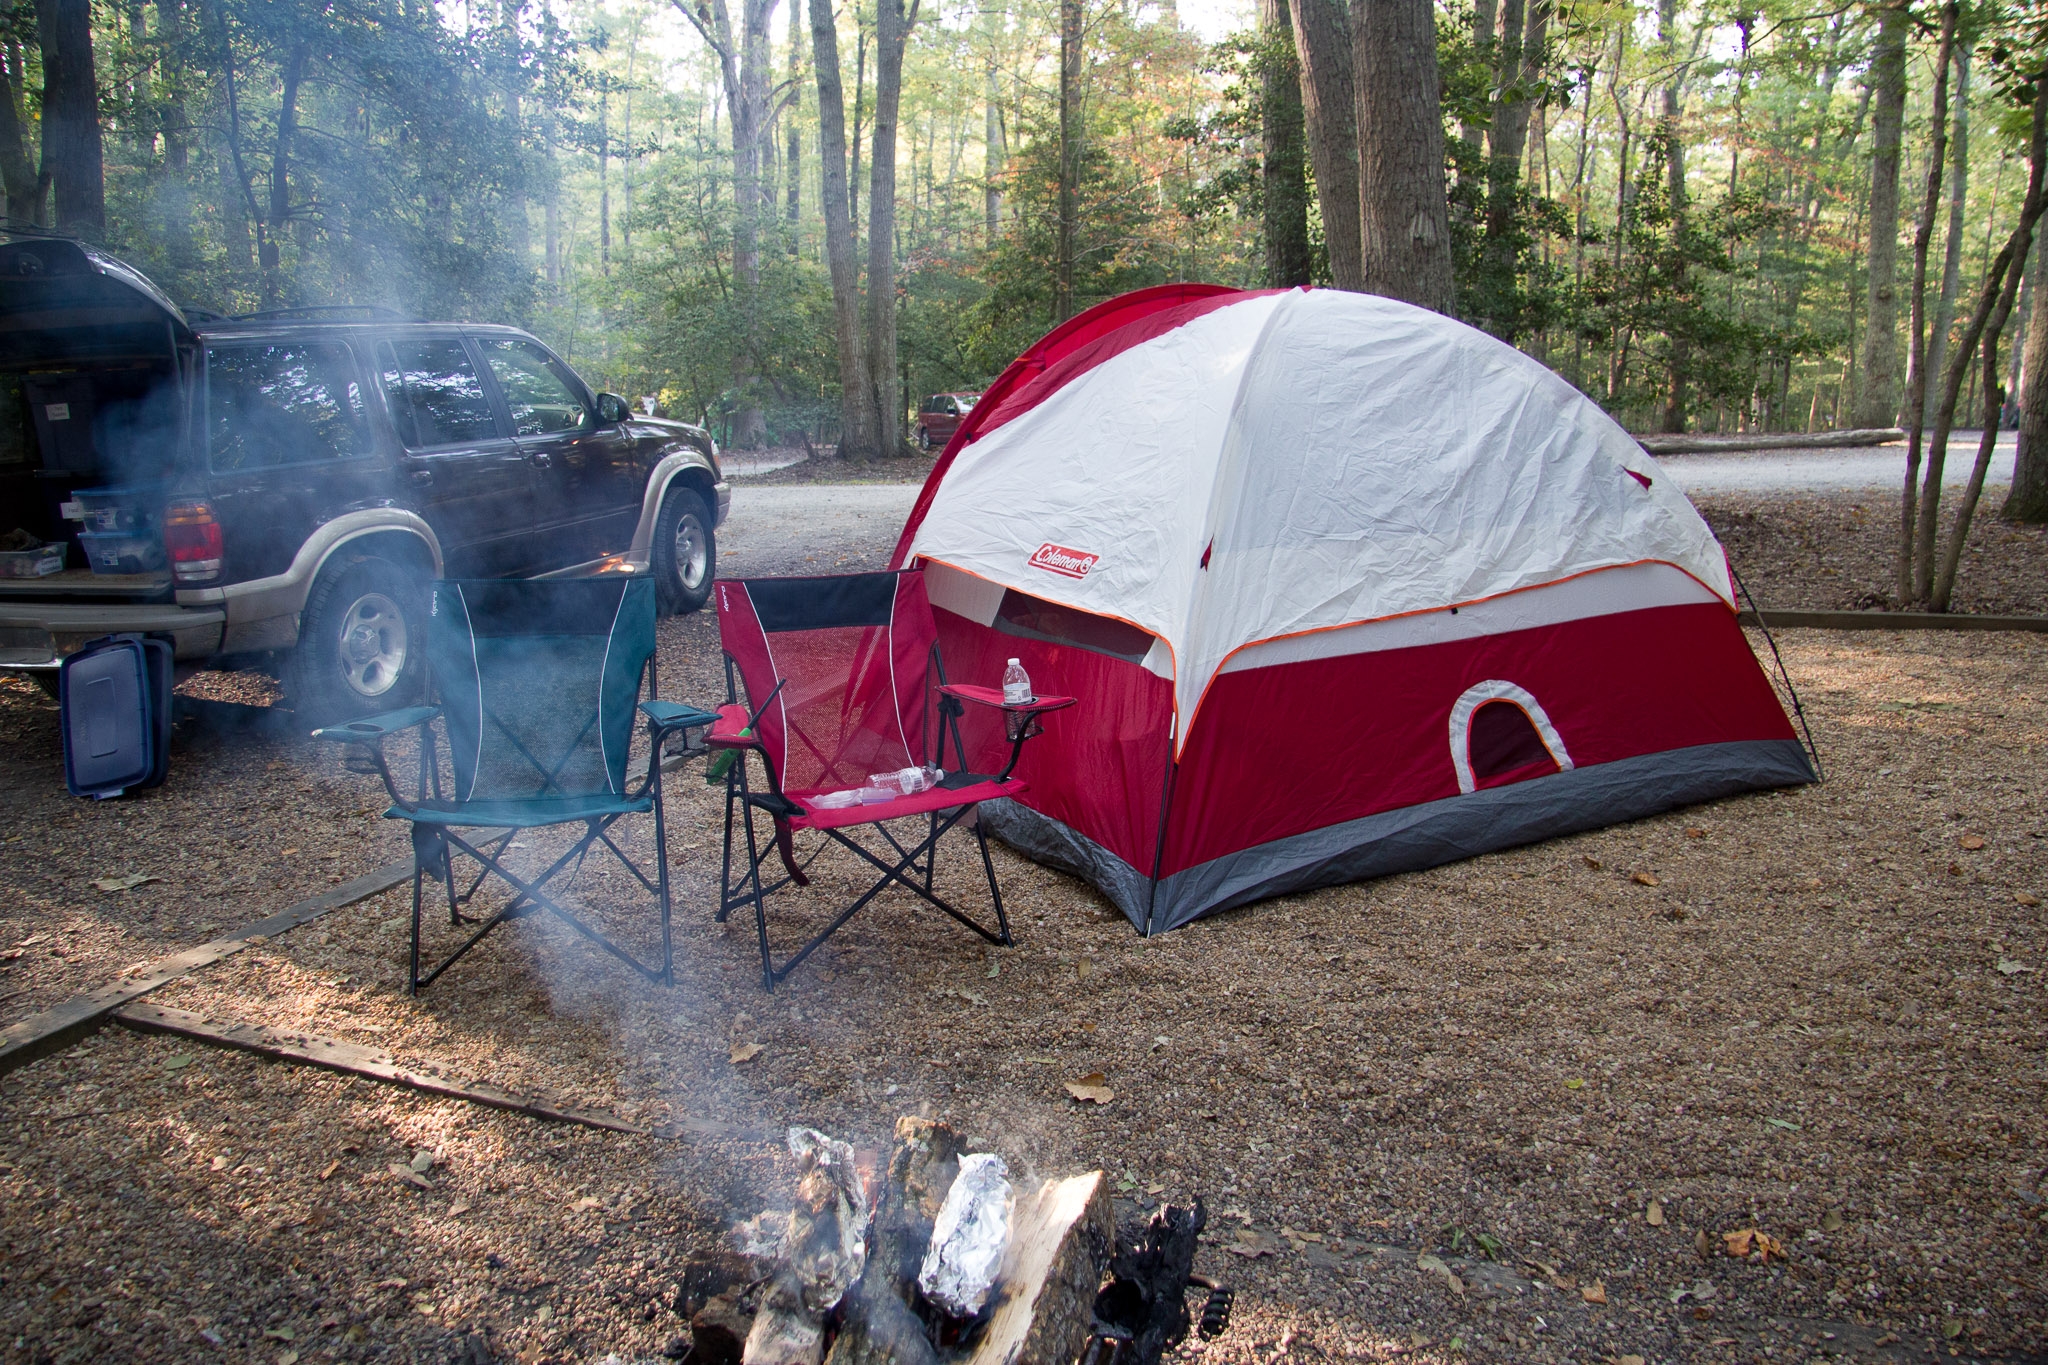 2013_10_05-08_58_13-westmoreland-state-park-camping